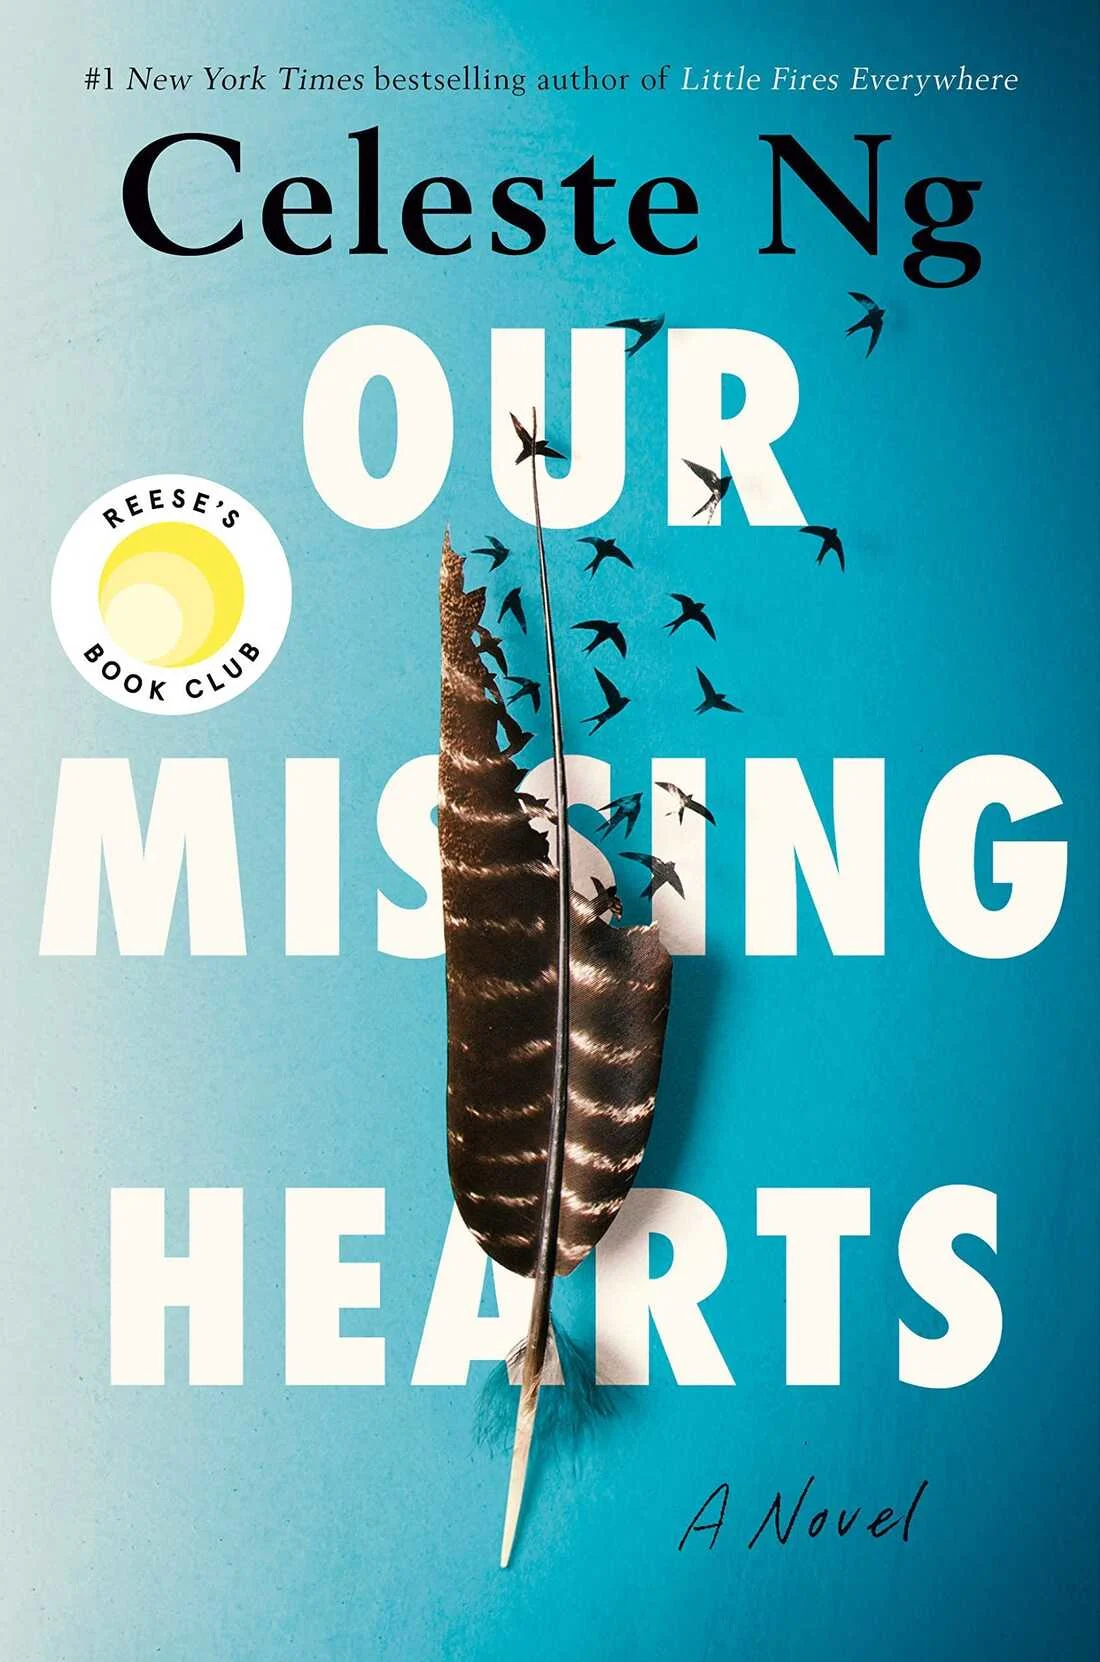 a feather disintegrating into birds on a blue ombre background. ugh reese witherspoon is vouching for this book for some reason